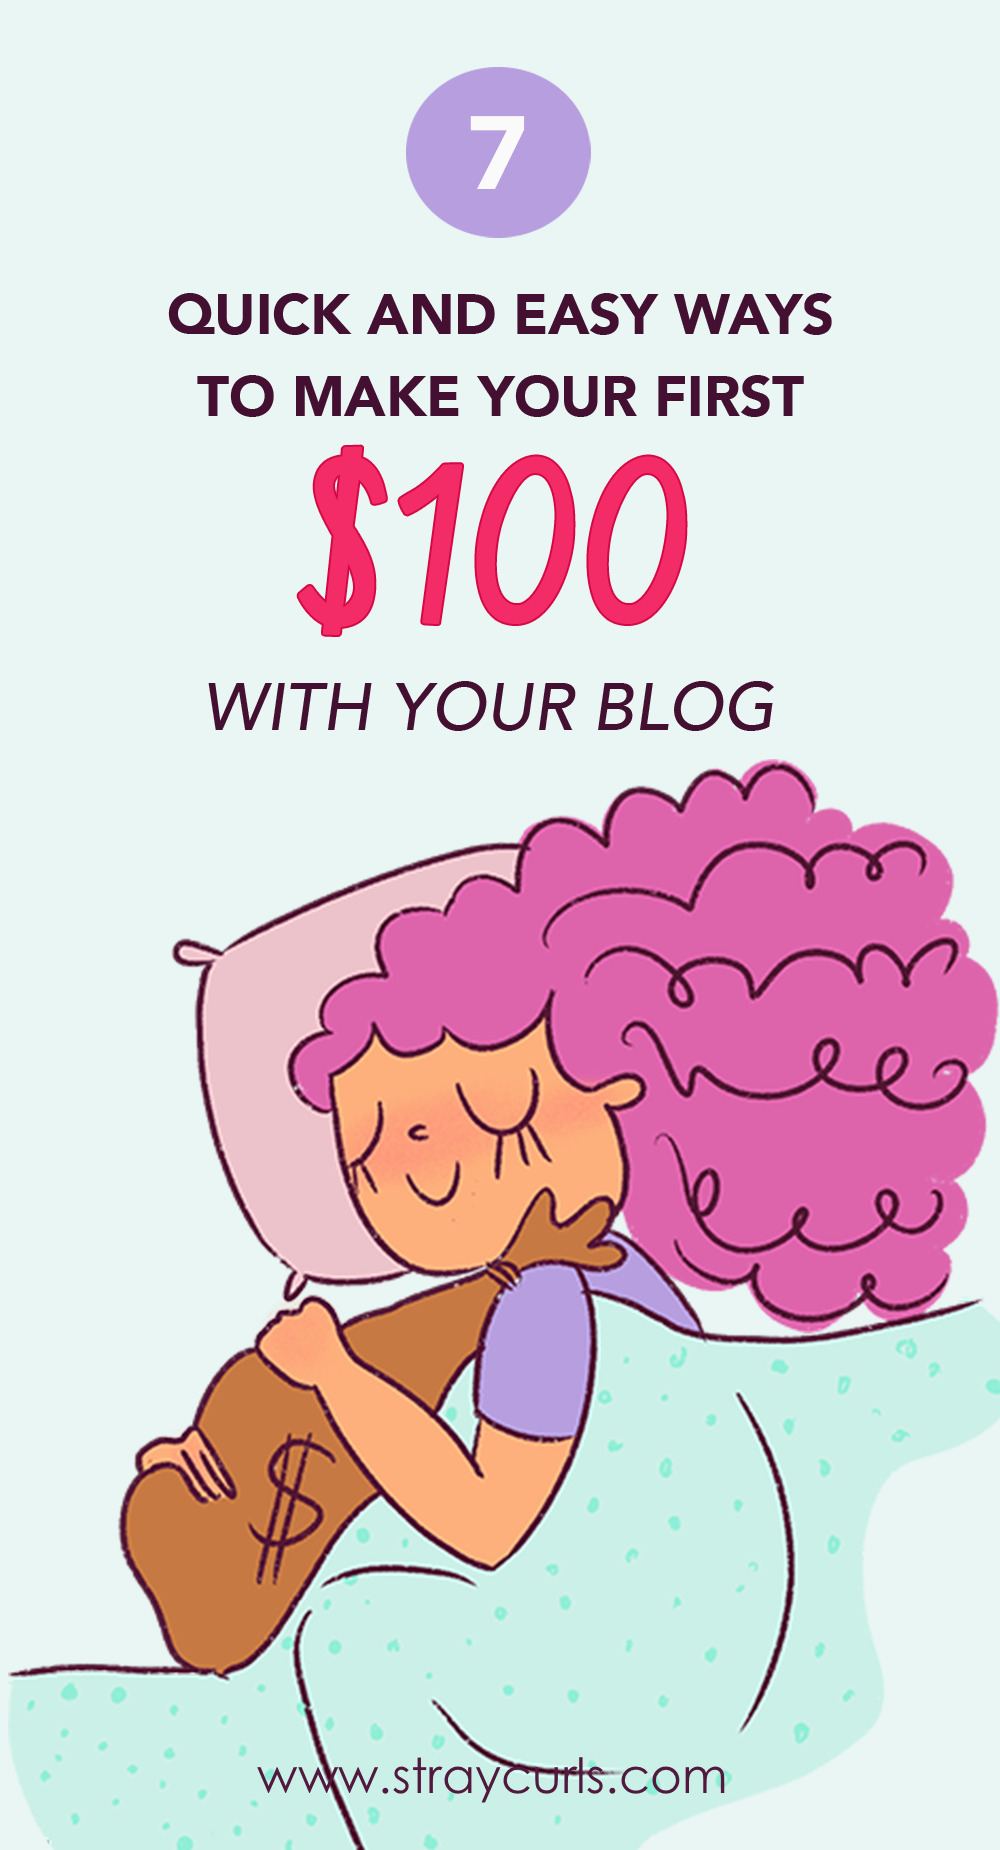 quick ways to make money blogging how to make your first $100 blogging